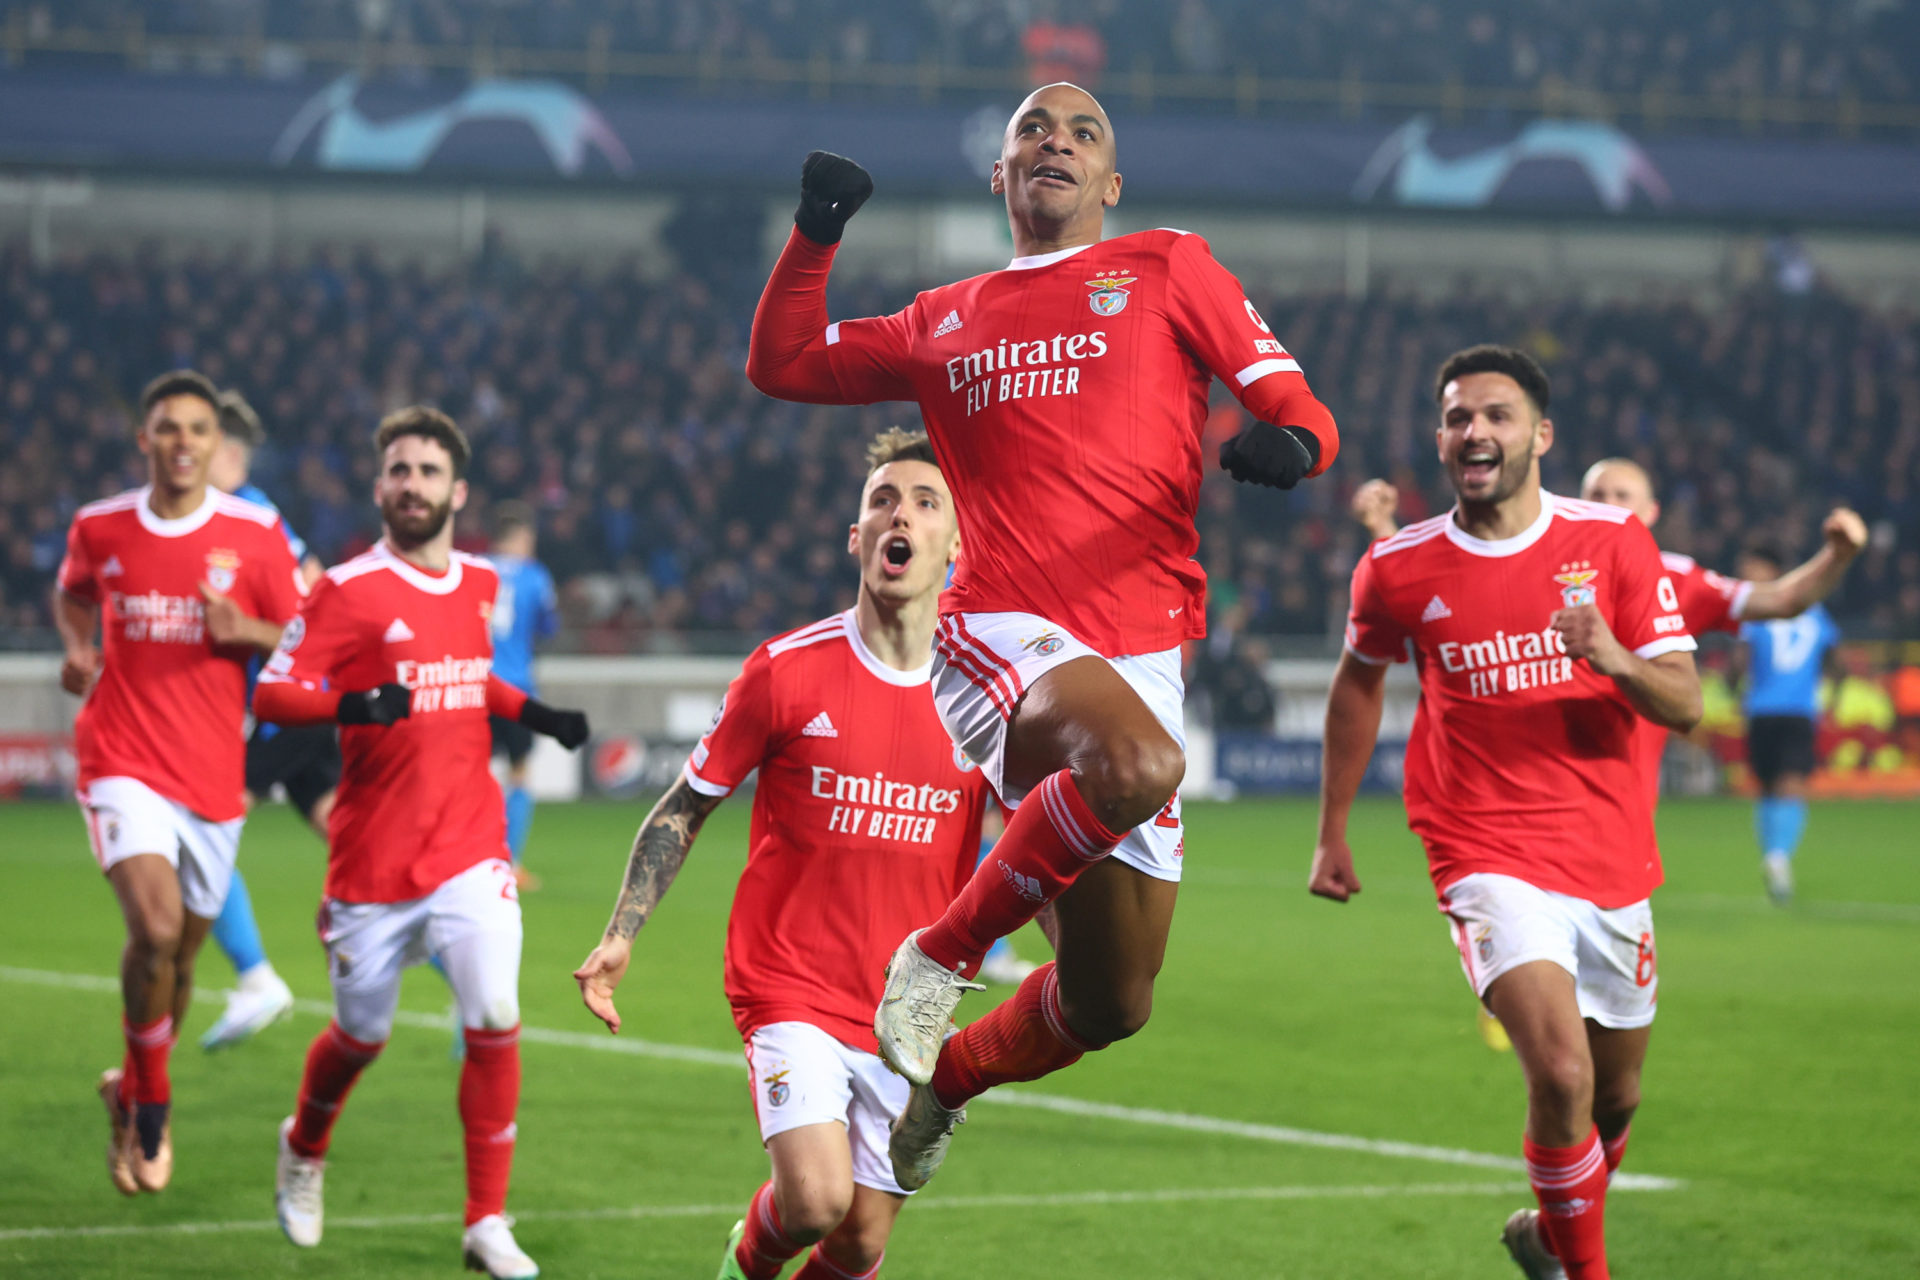 Benfica are still going strong in the Champions League this season